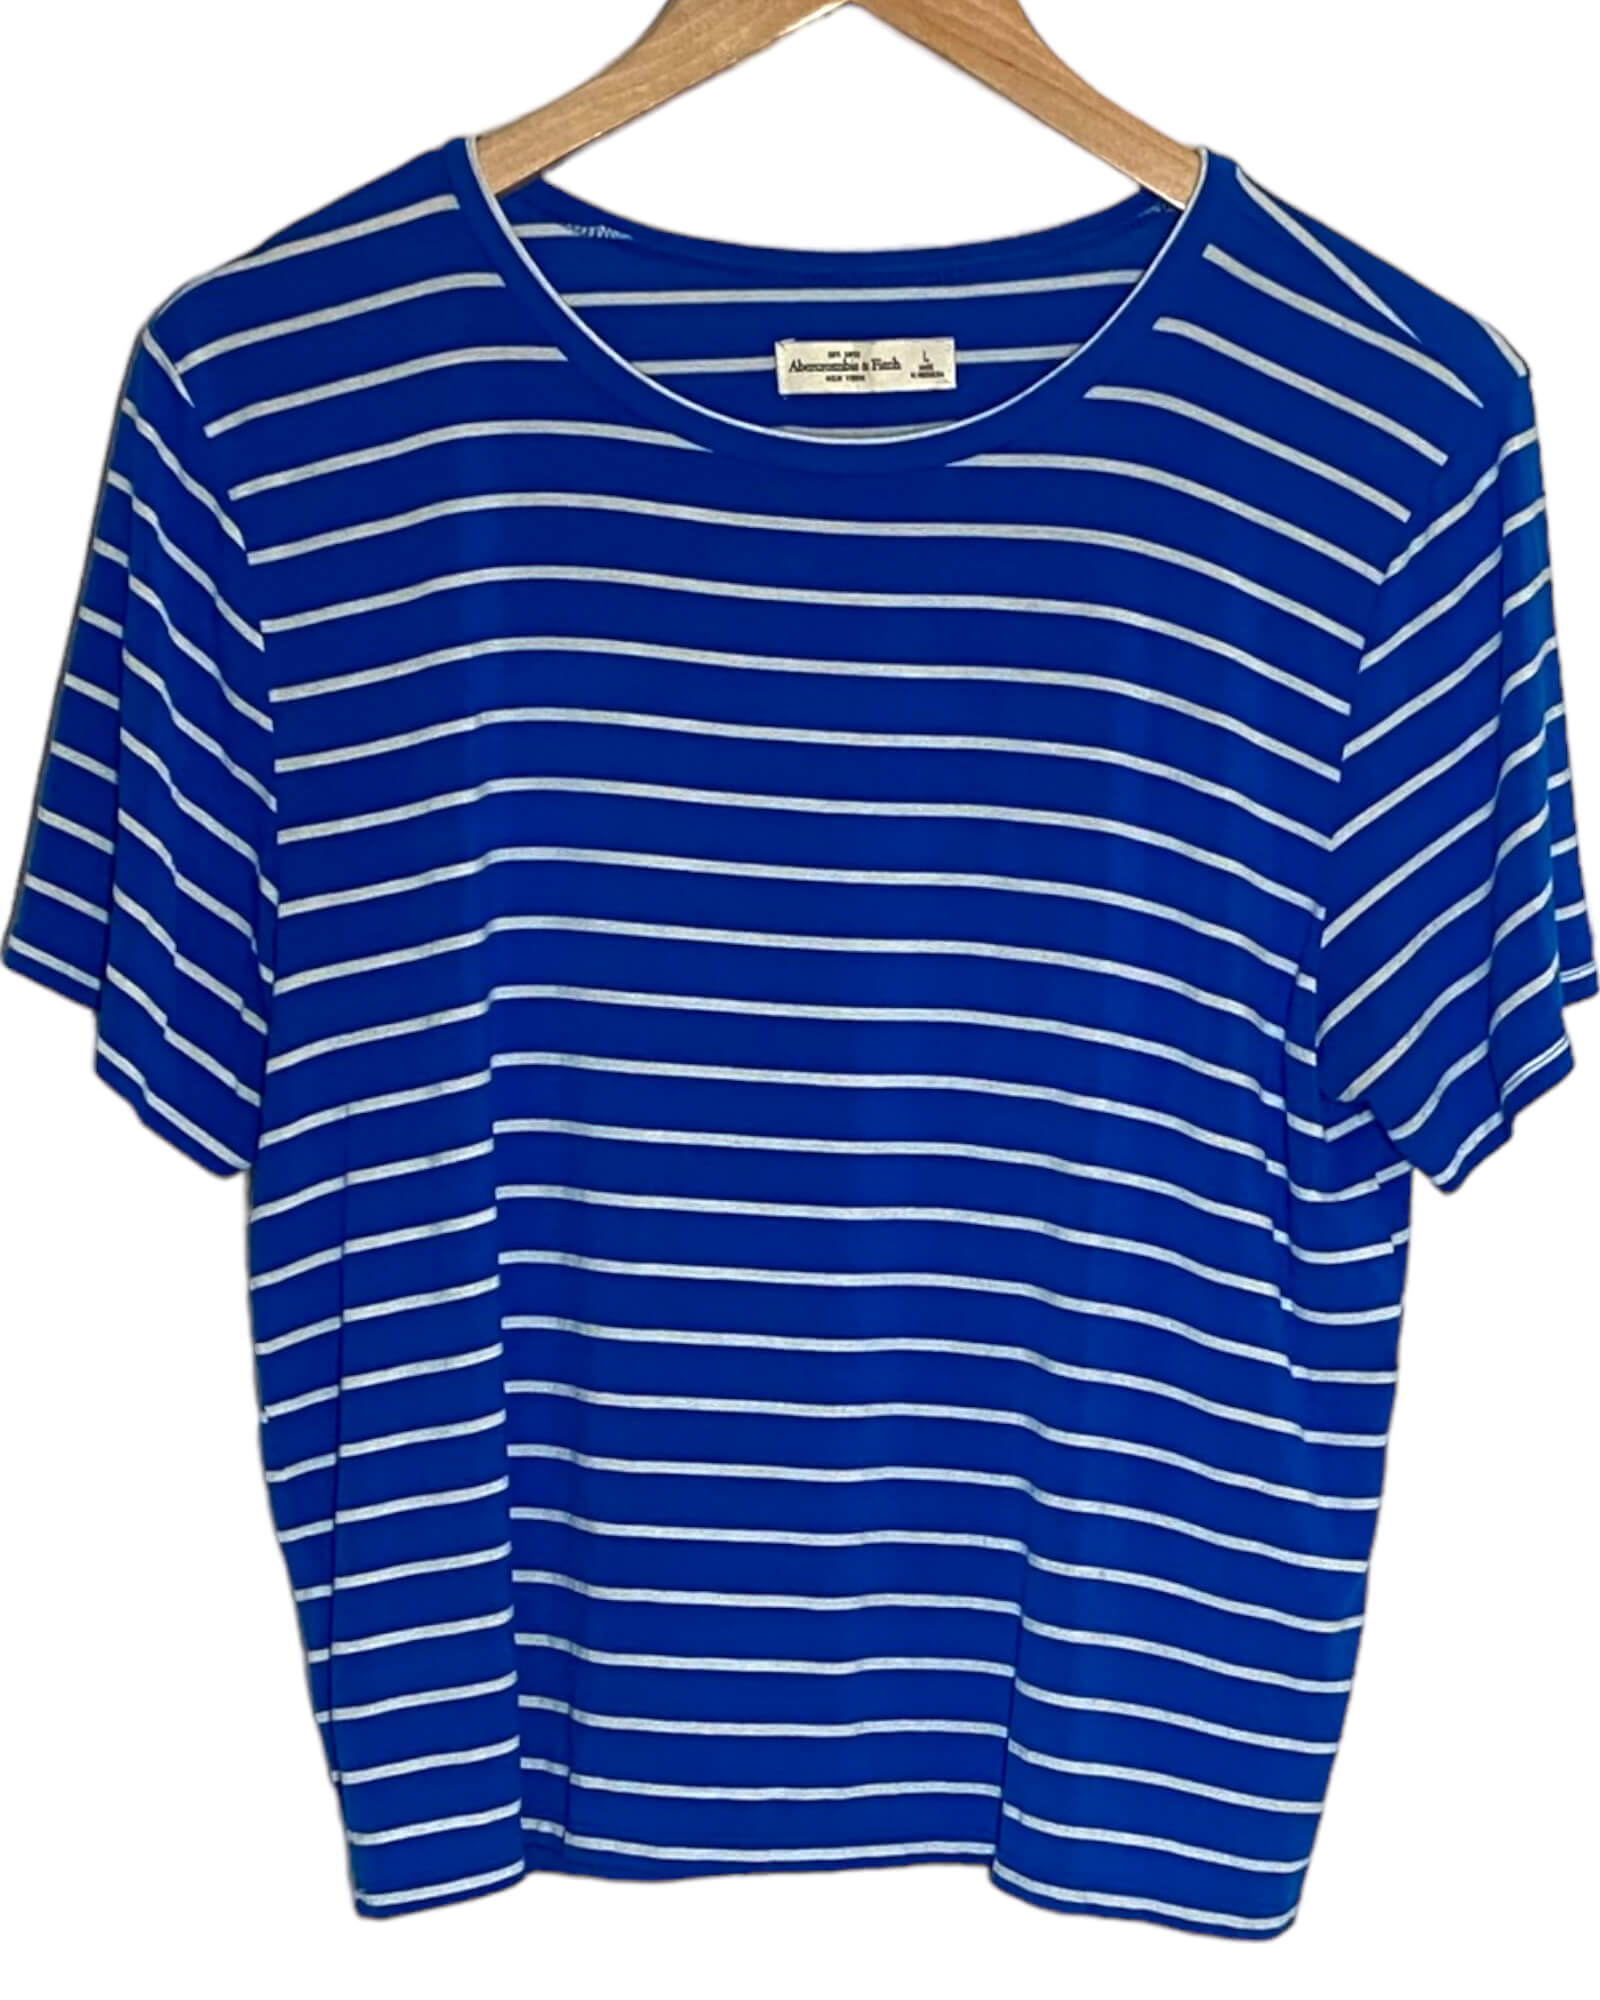 Bright Spring ABERCROMBIE & FITCH blue and white stripe tee